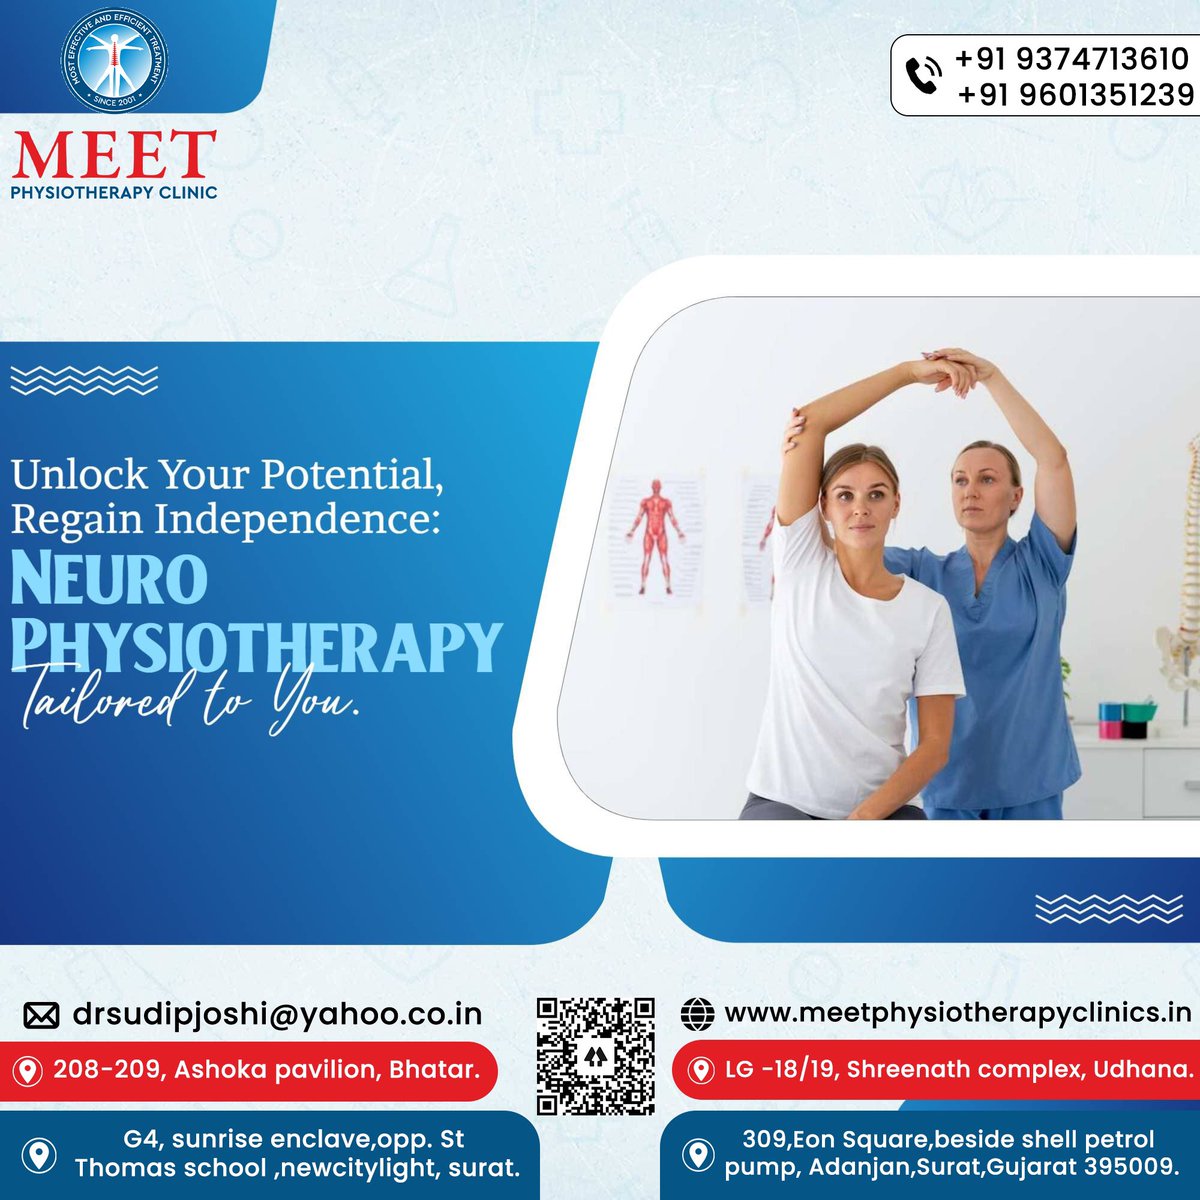 Unlock Your Potential Regain Independence NEURO PHYSIOTHERAPY Tailored To You.                                                   

Watch This Video To Know More About NeuroPhysiotherapy and Subscribe The Channel: